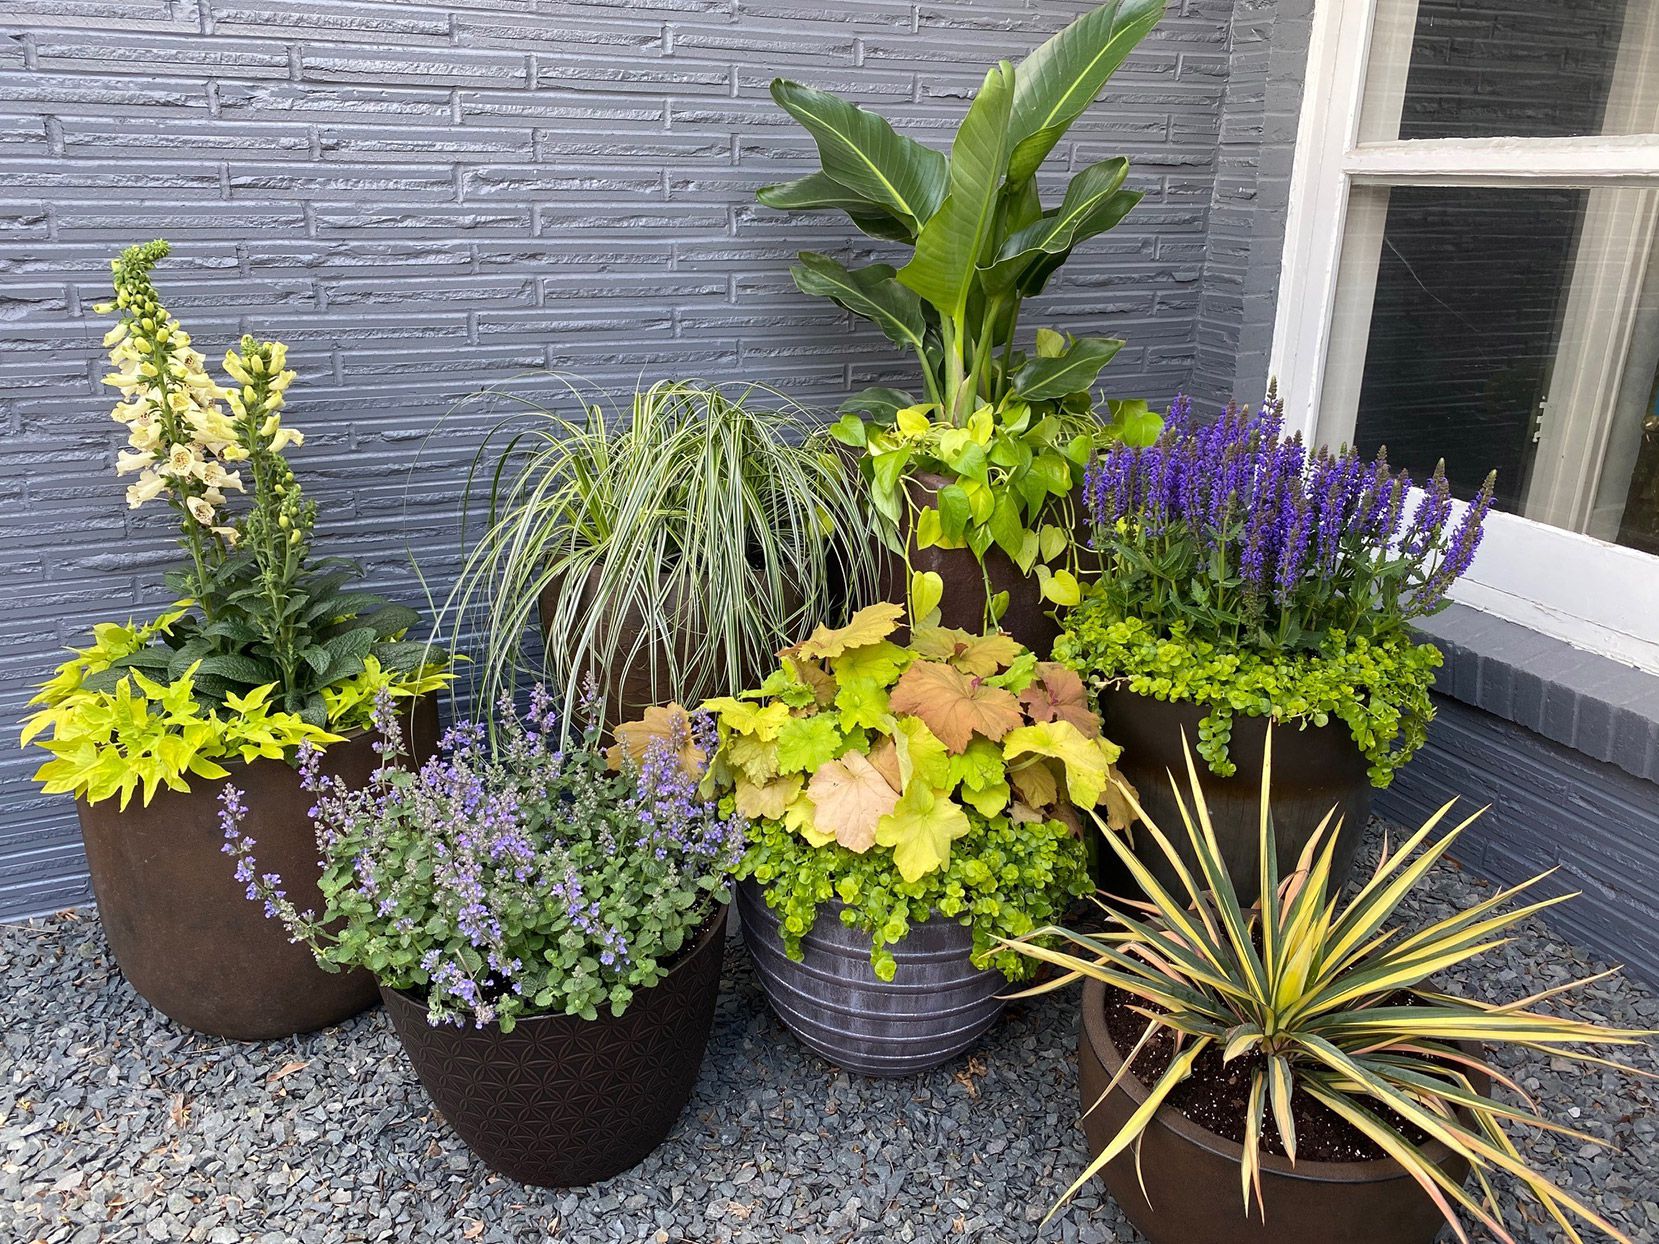 How to Arrange Potted Plants on a Patio